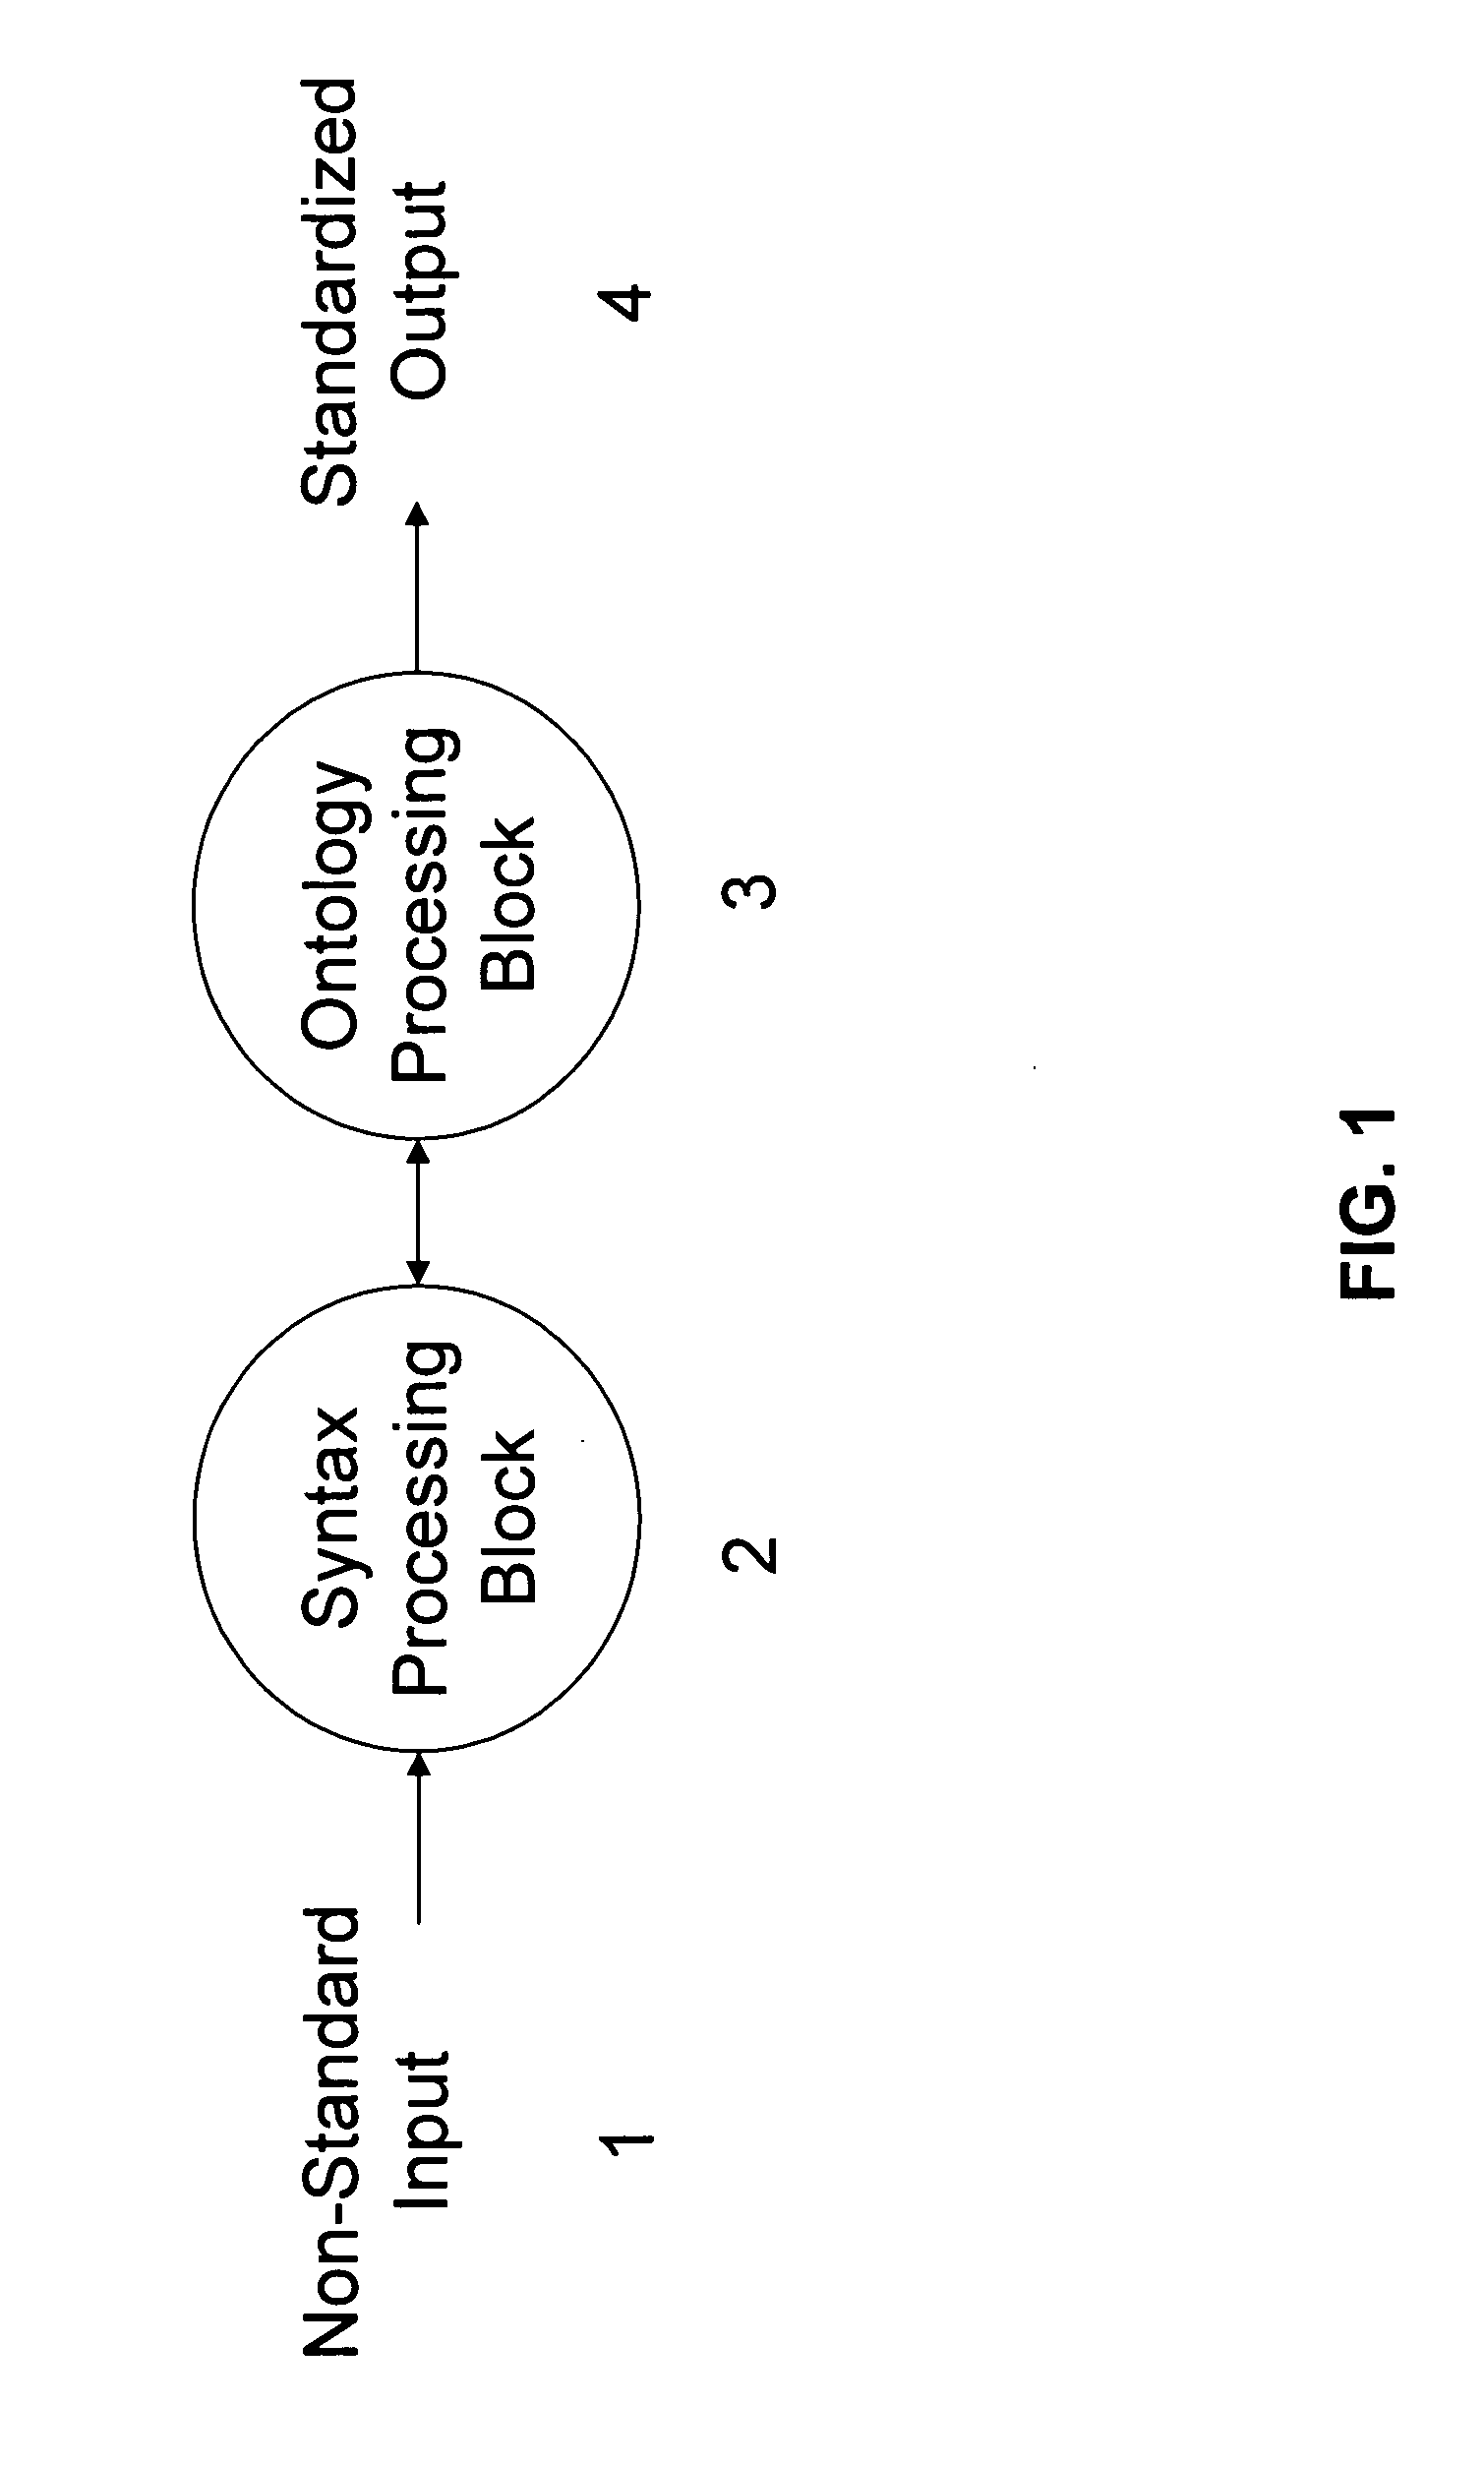 Ontology based medical patient evaluation method for data capture and knowledge representation